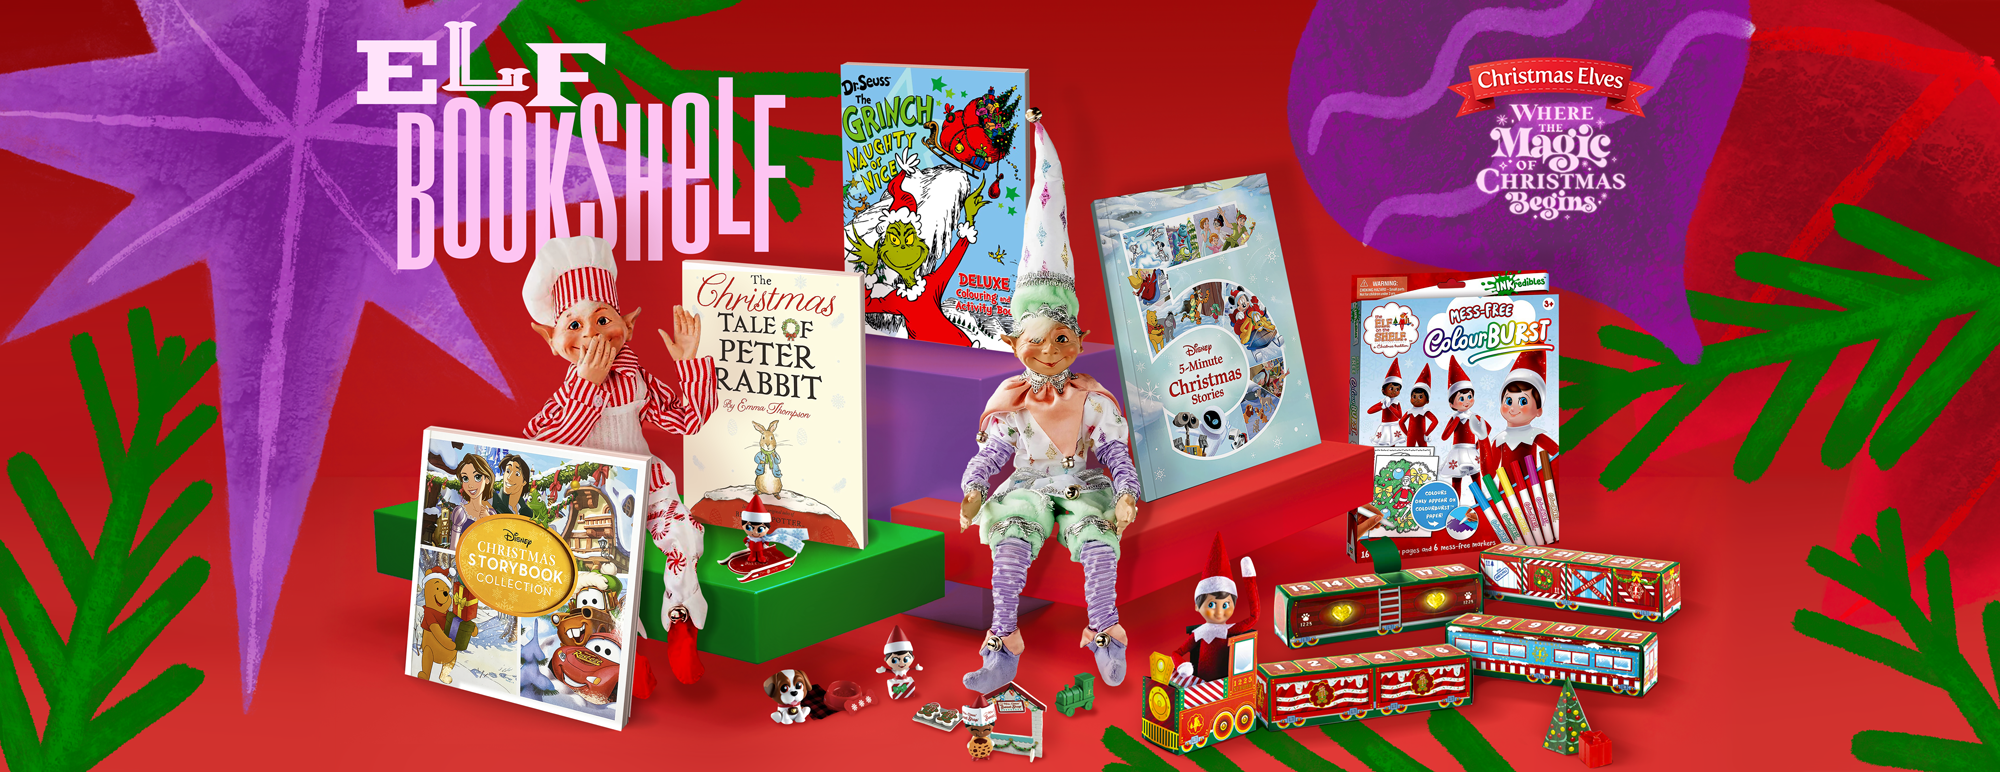 Books, Puzzles & Games at Christmas Elves!